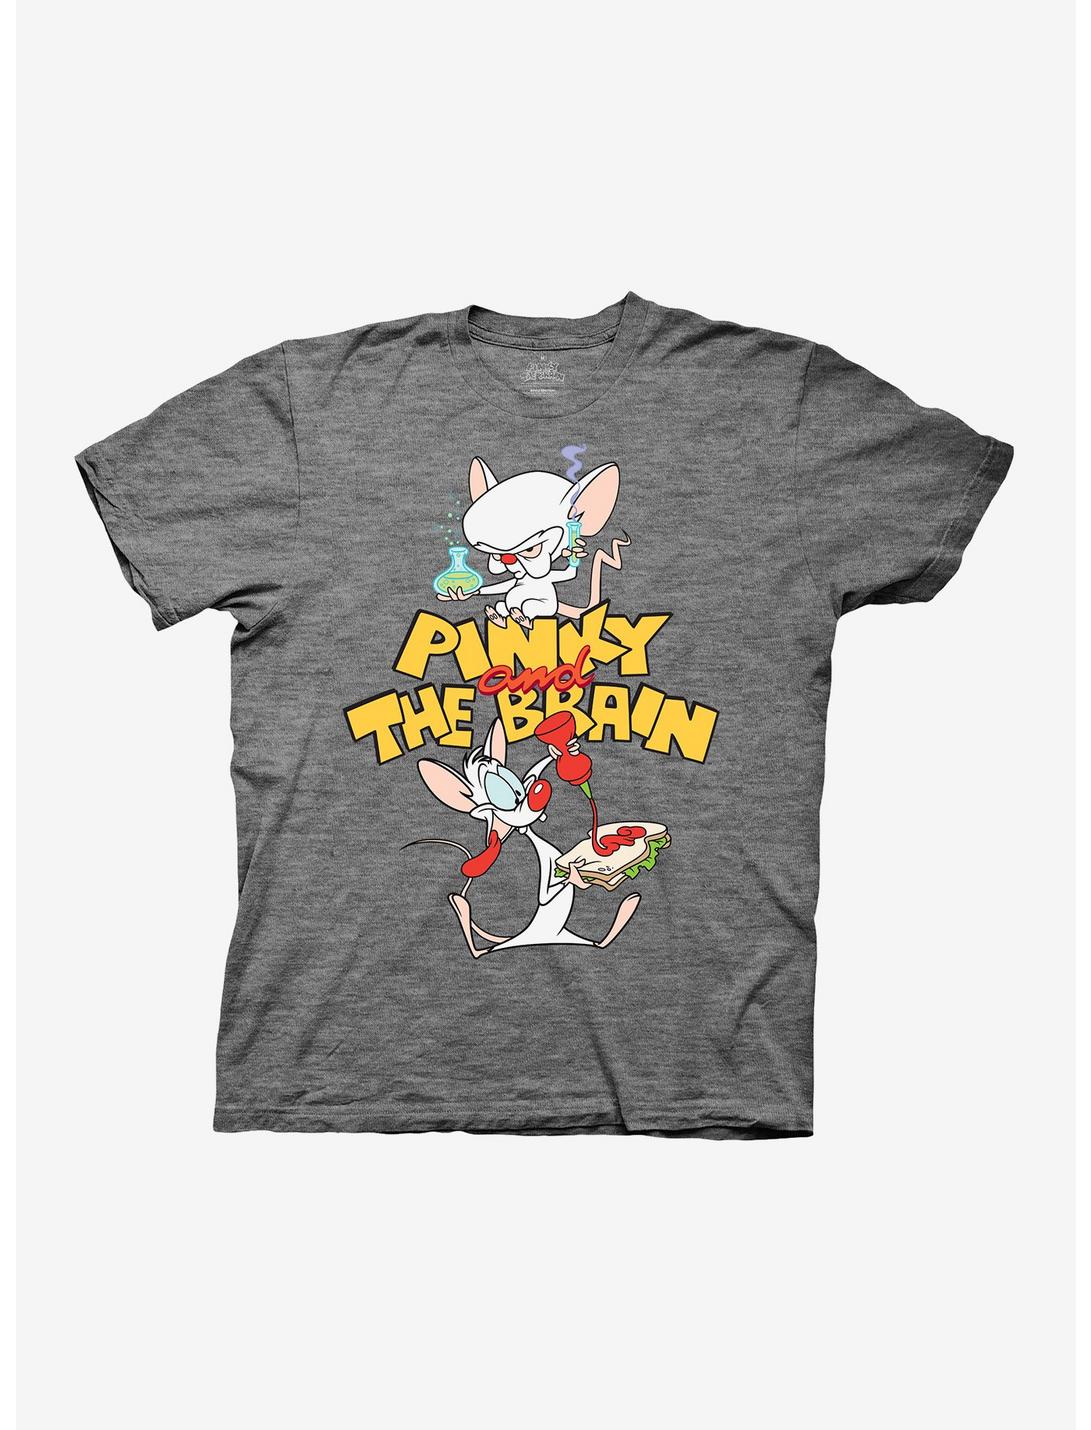 Animaniacs Pinky And The Brain T-Shirt Hot Topic Exclusive, BLACK, hi-res